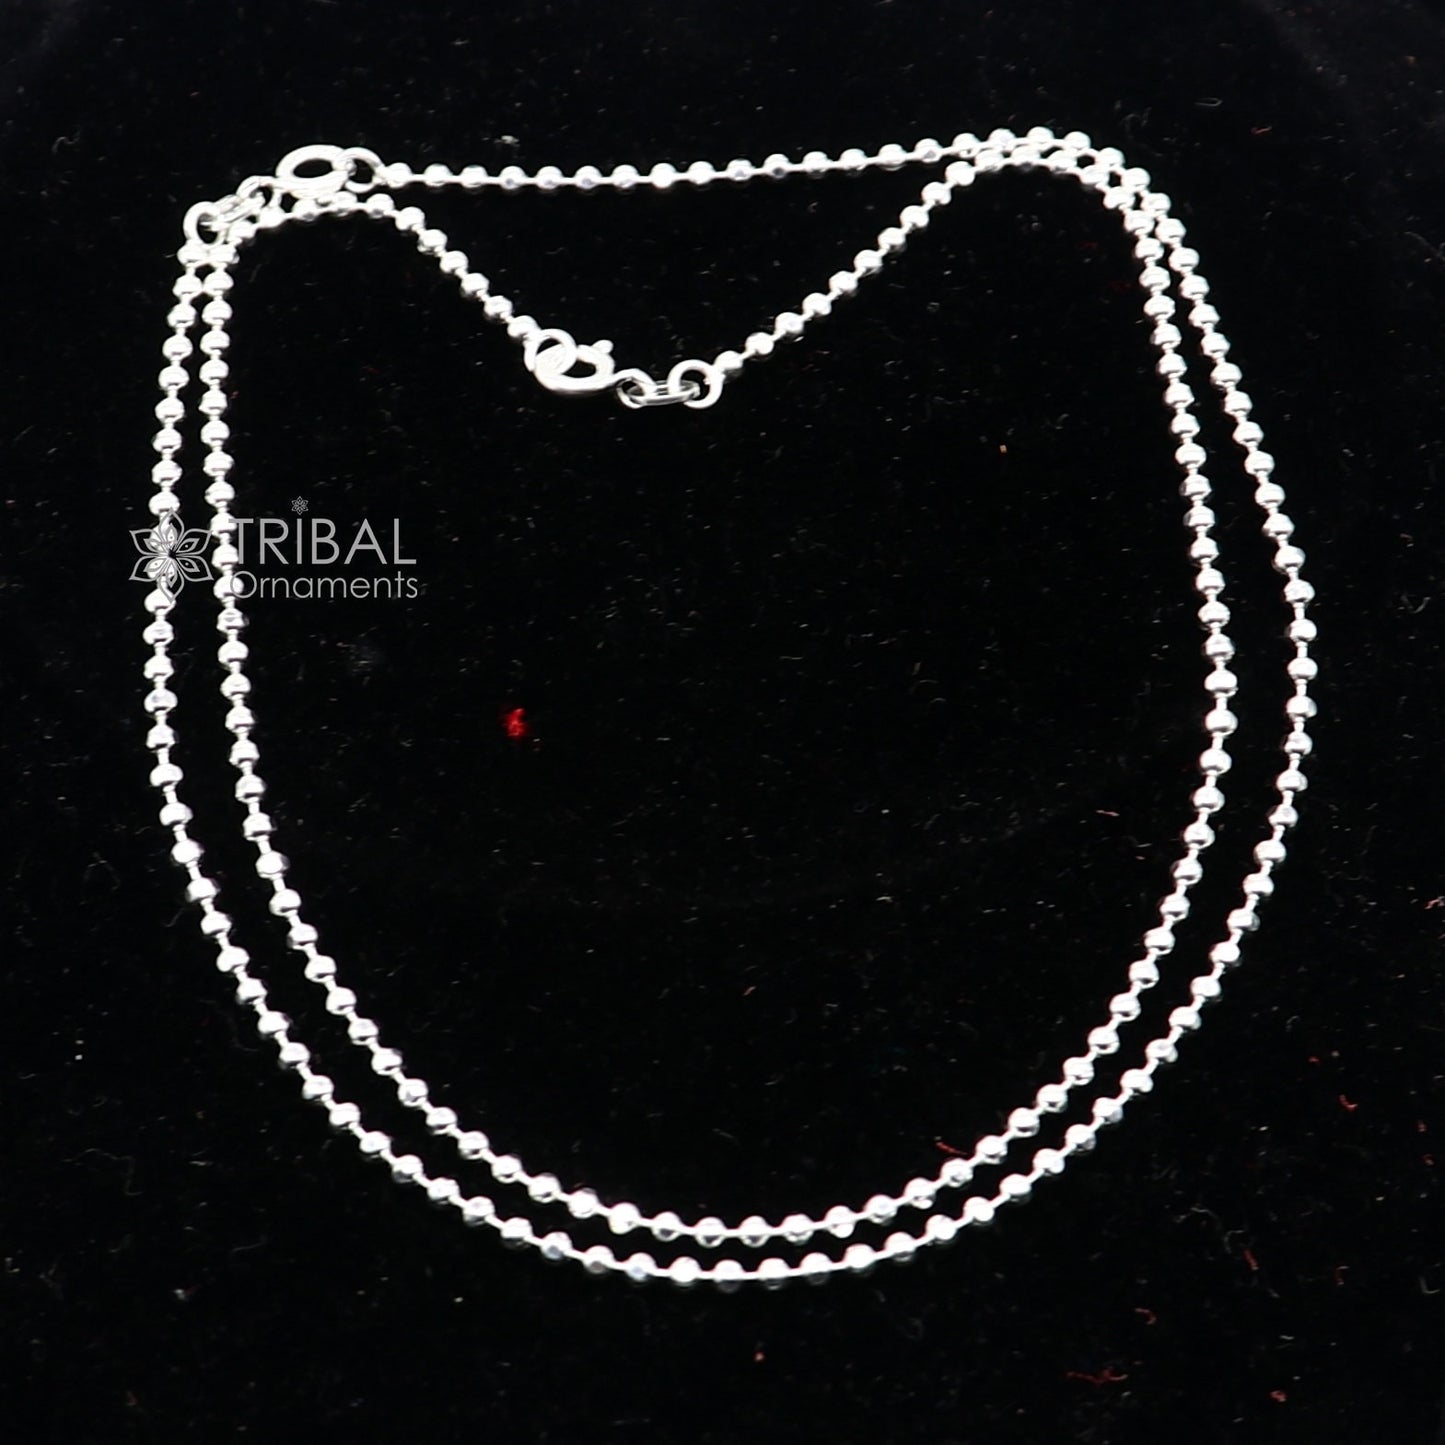 2mm 925 sterling silver beaded/ball chain anklet bracelet amazing light weight delicate anklets gorgeous belly dance silver jewelry ank614 - TRIBAL ORNAMENTS